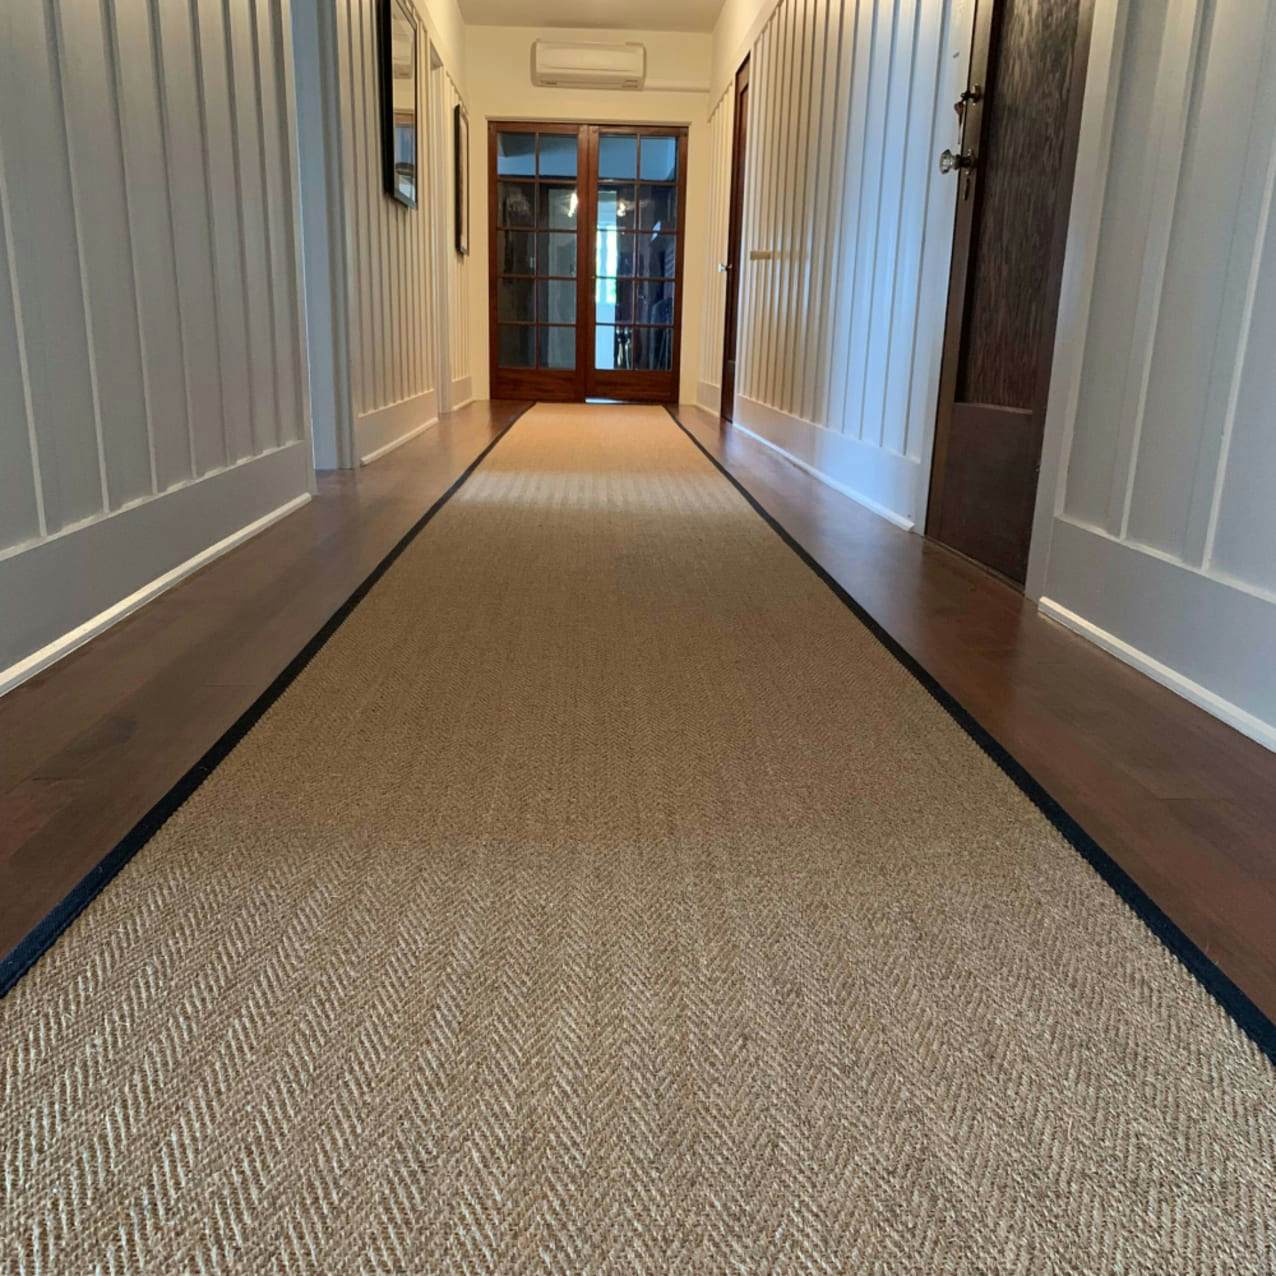 Create Runner Rugs for Hallway, Outdoor, Anywhere